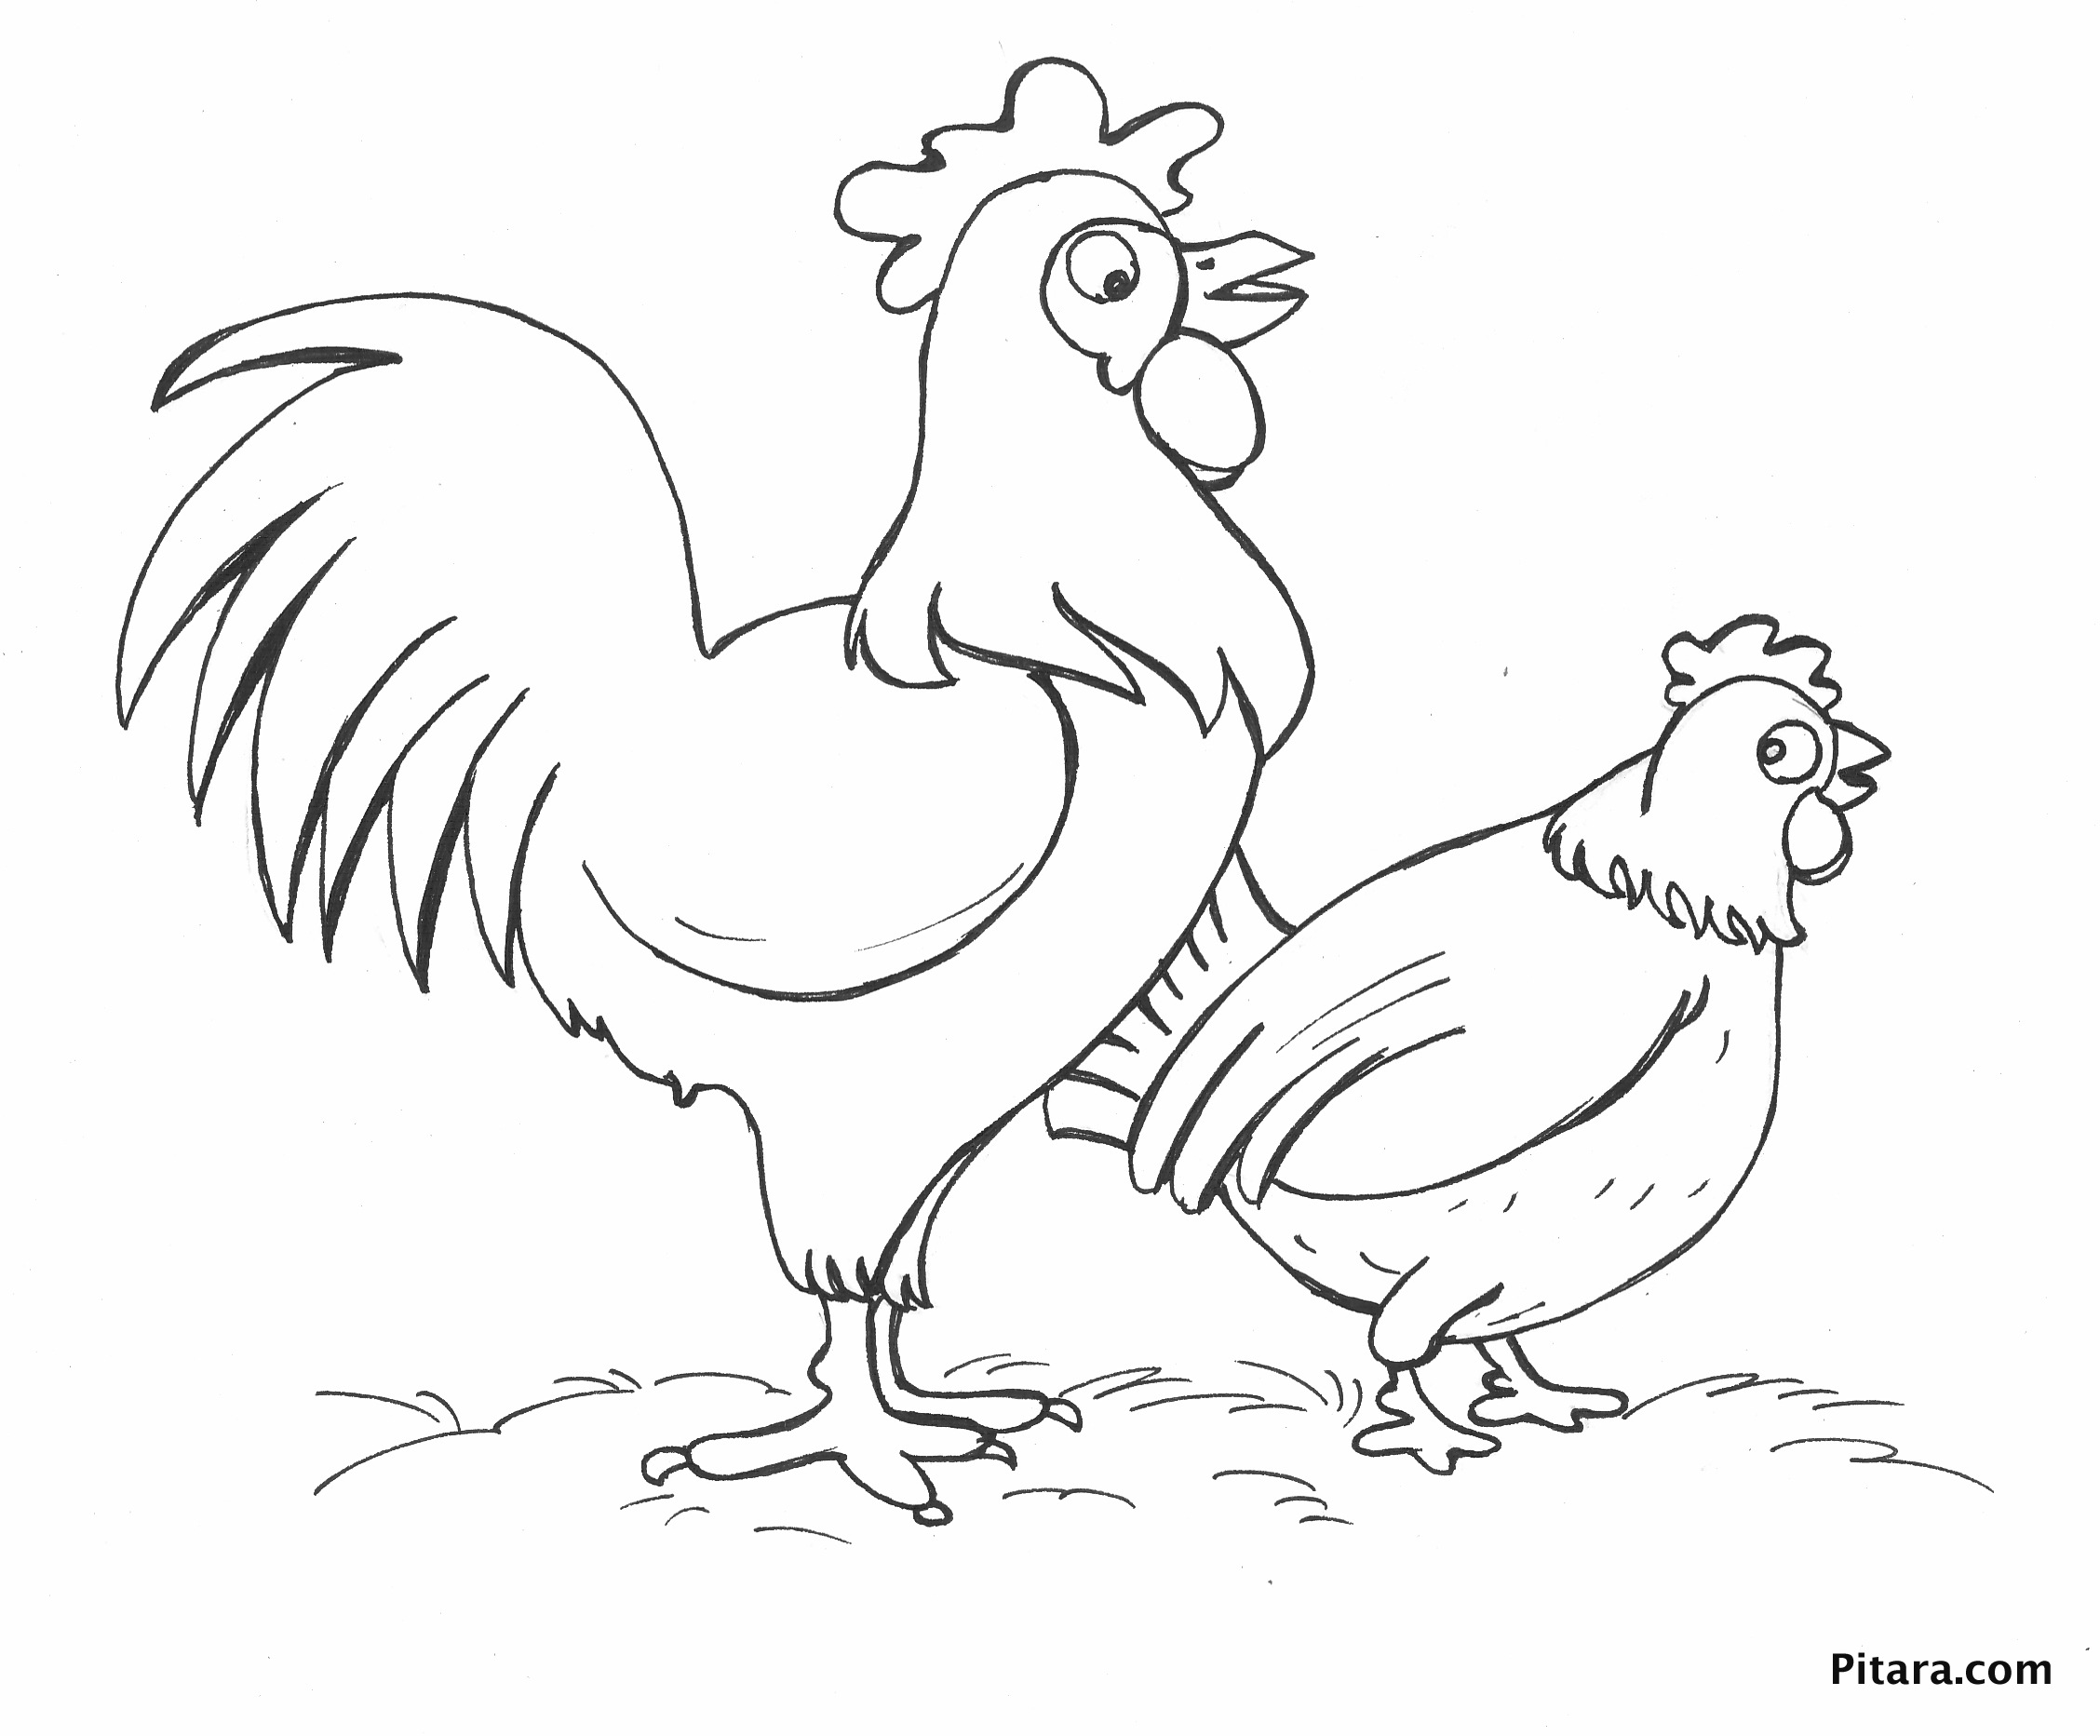 Two chickens – Coloring page | Pitara Kids Network